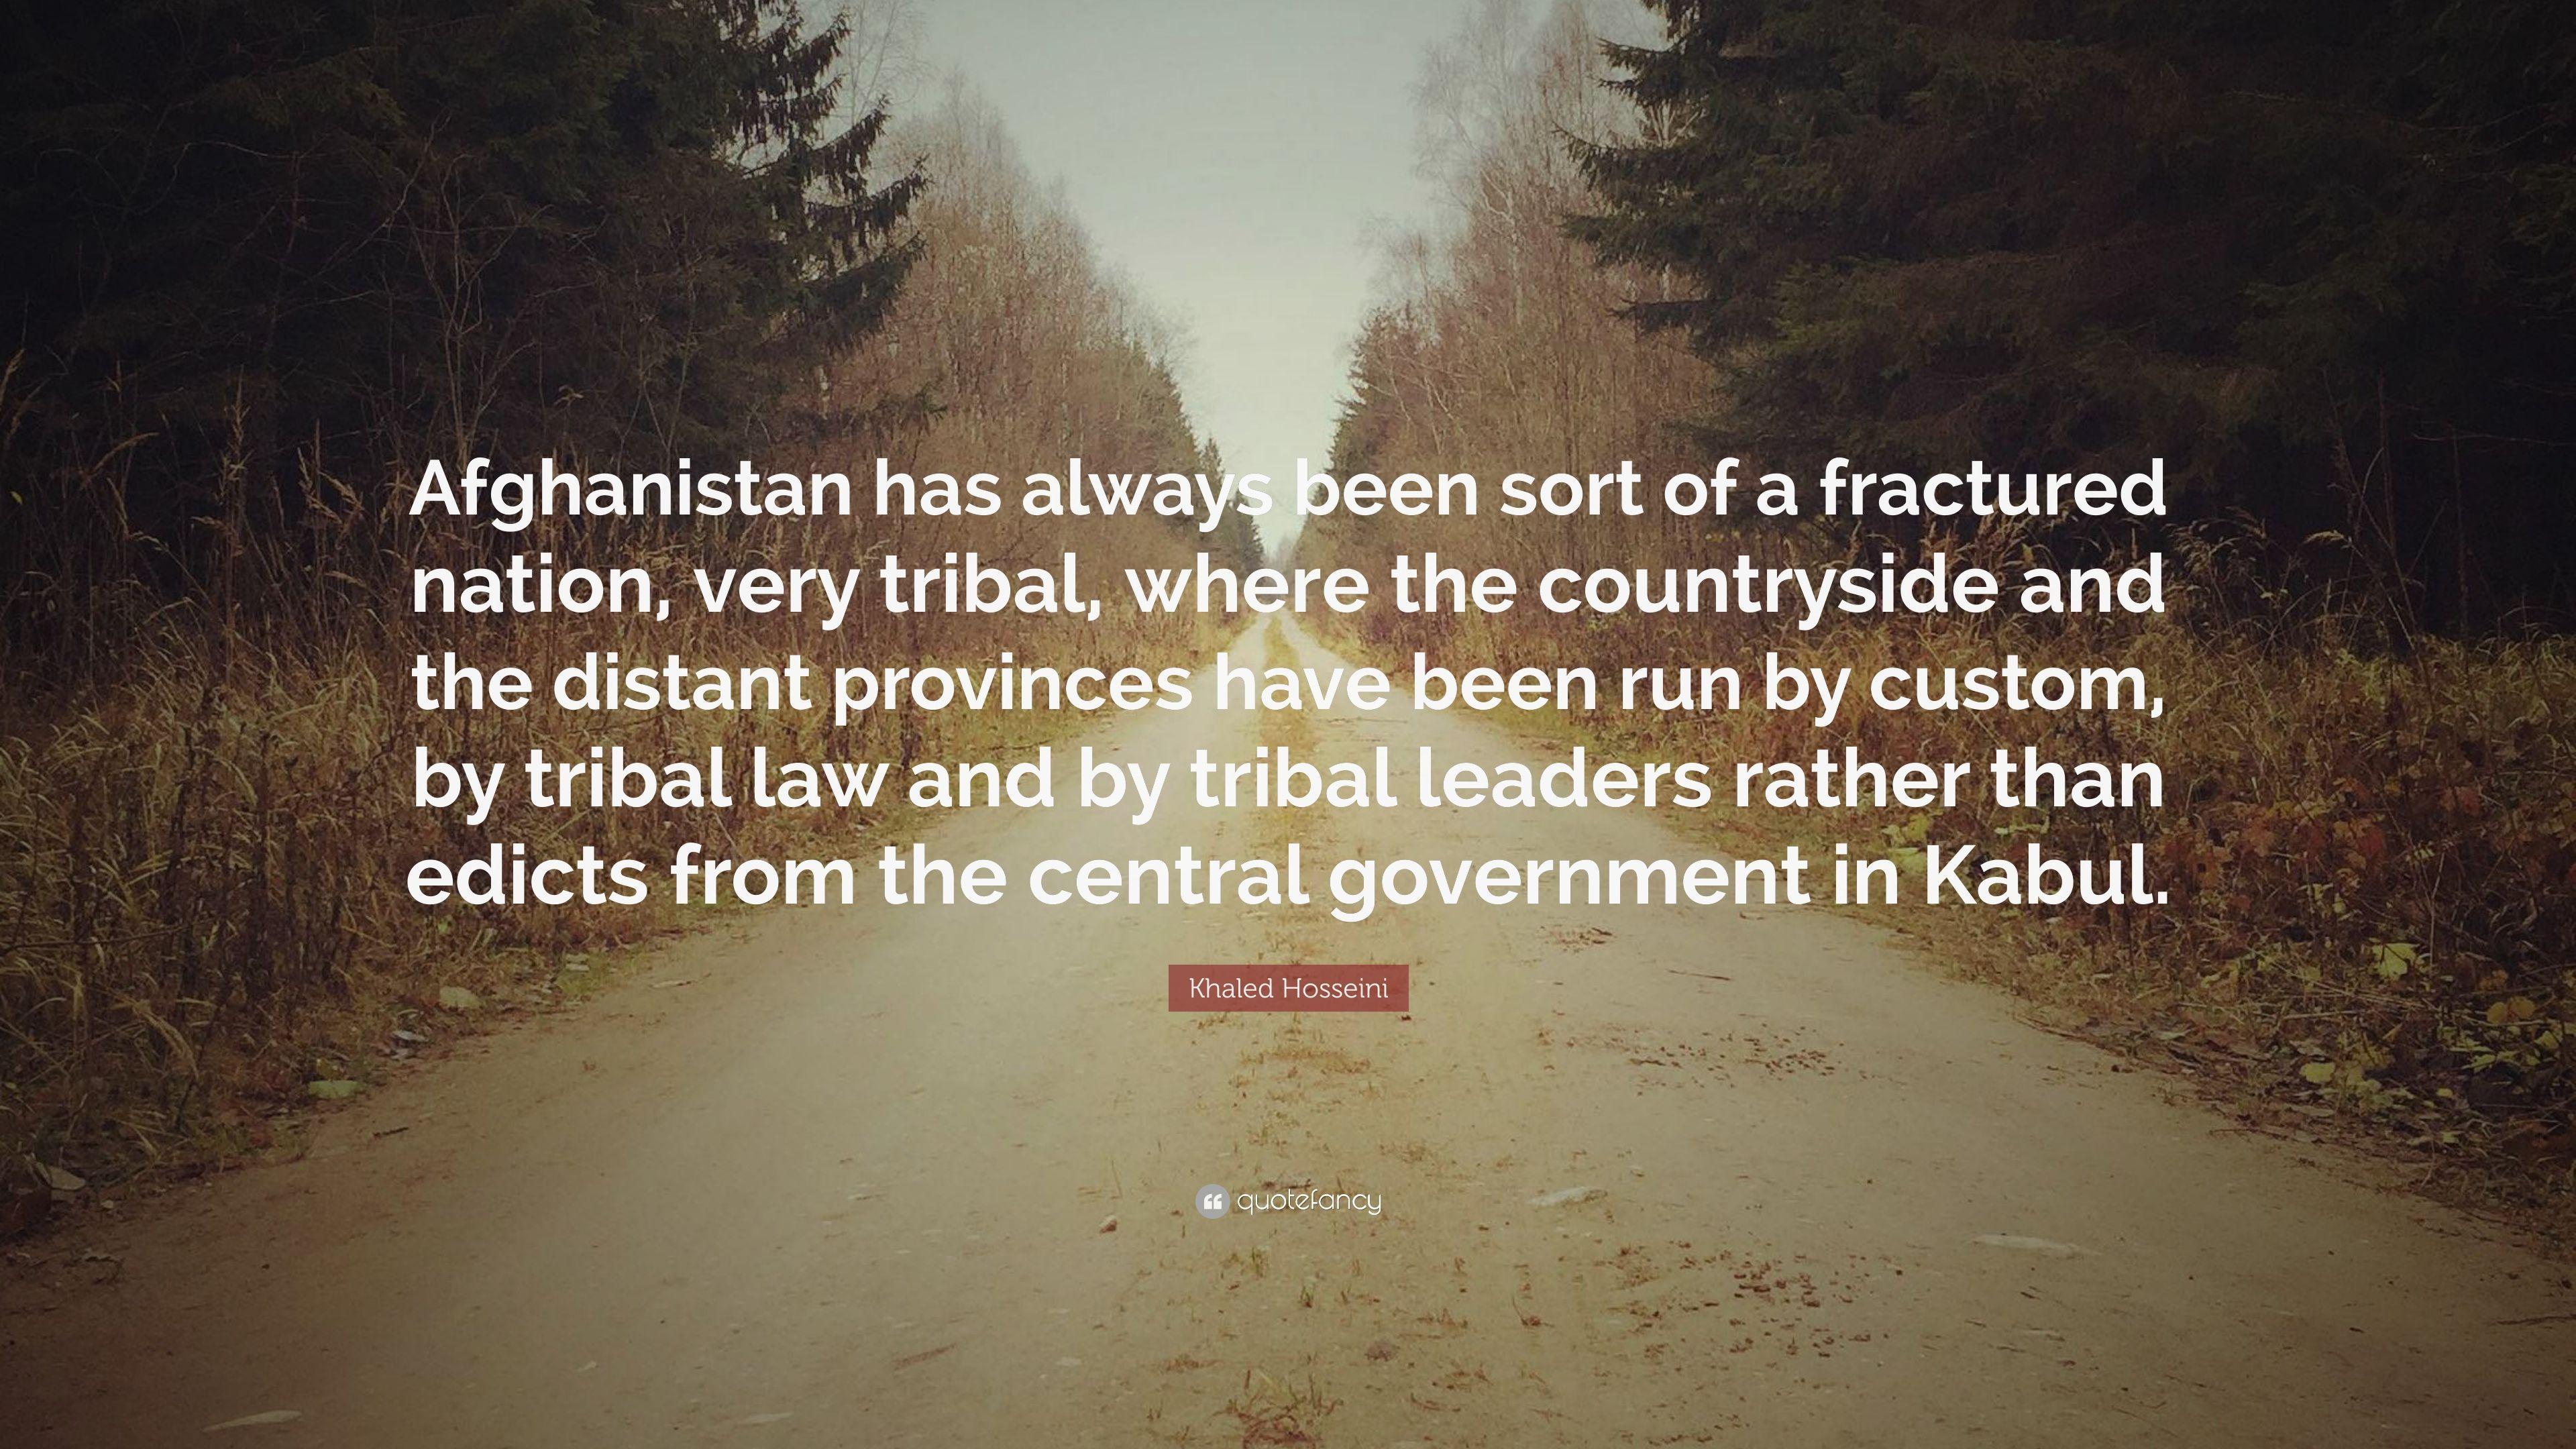 Khaled Hosseini Quote: “Afghanistan has always been sort of a